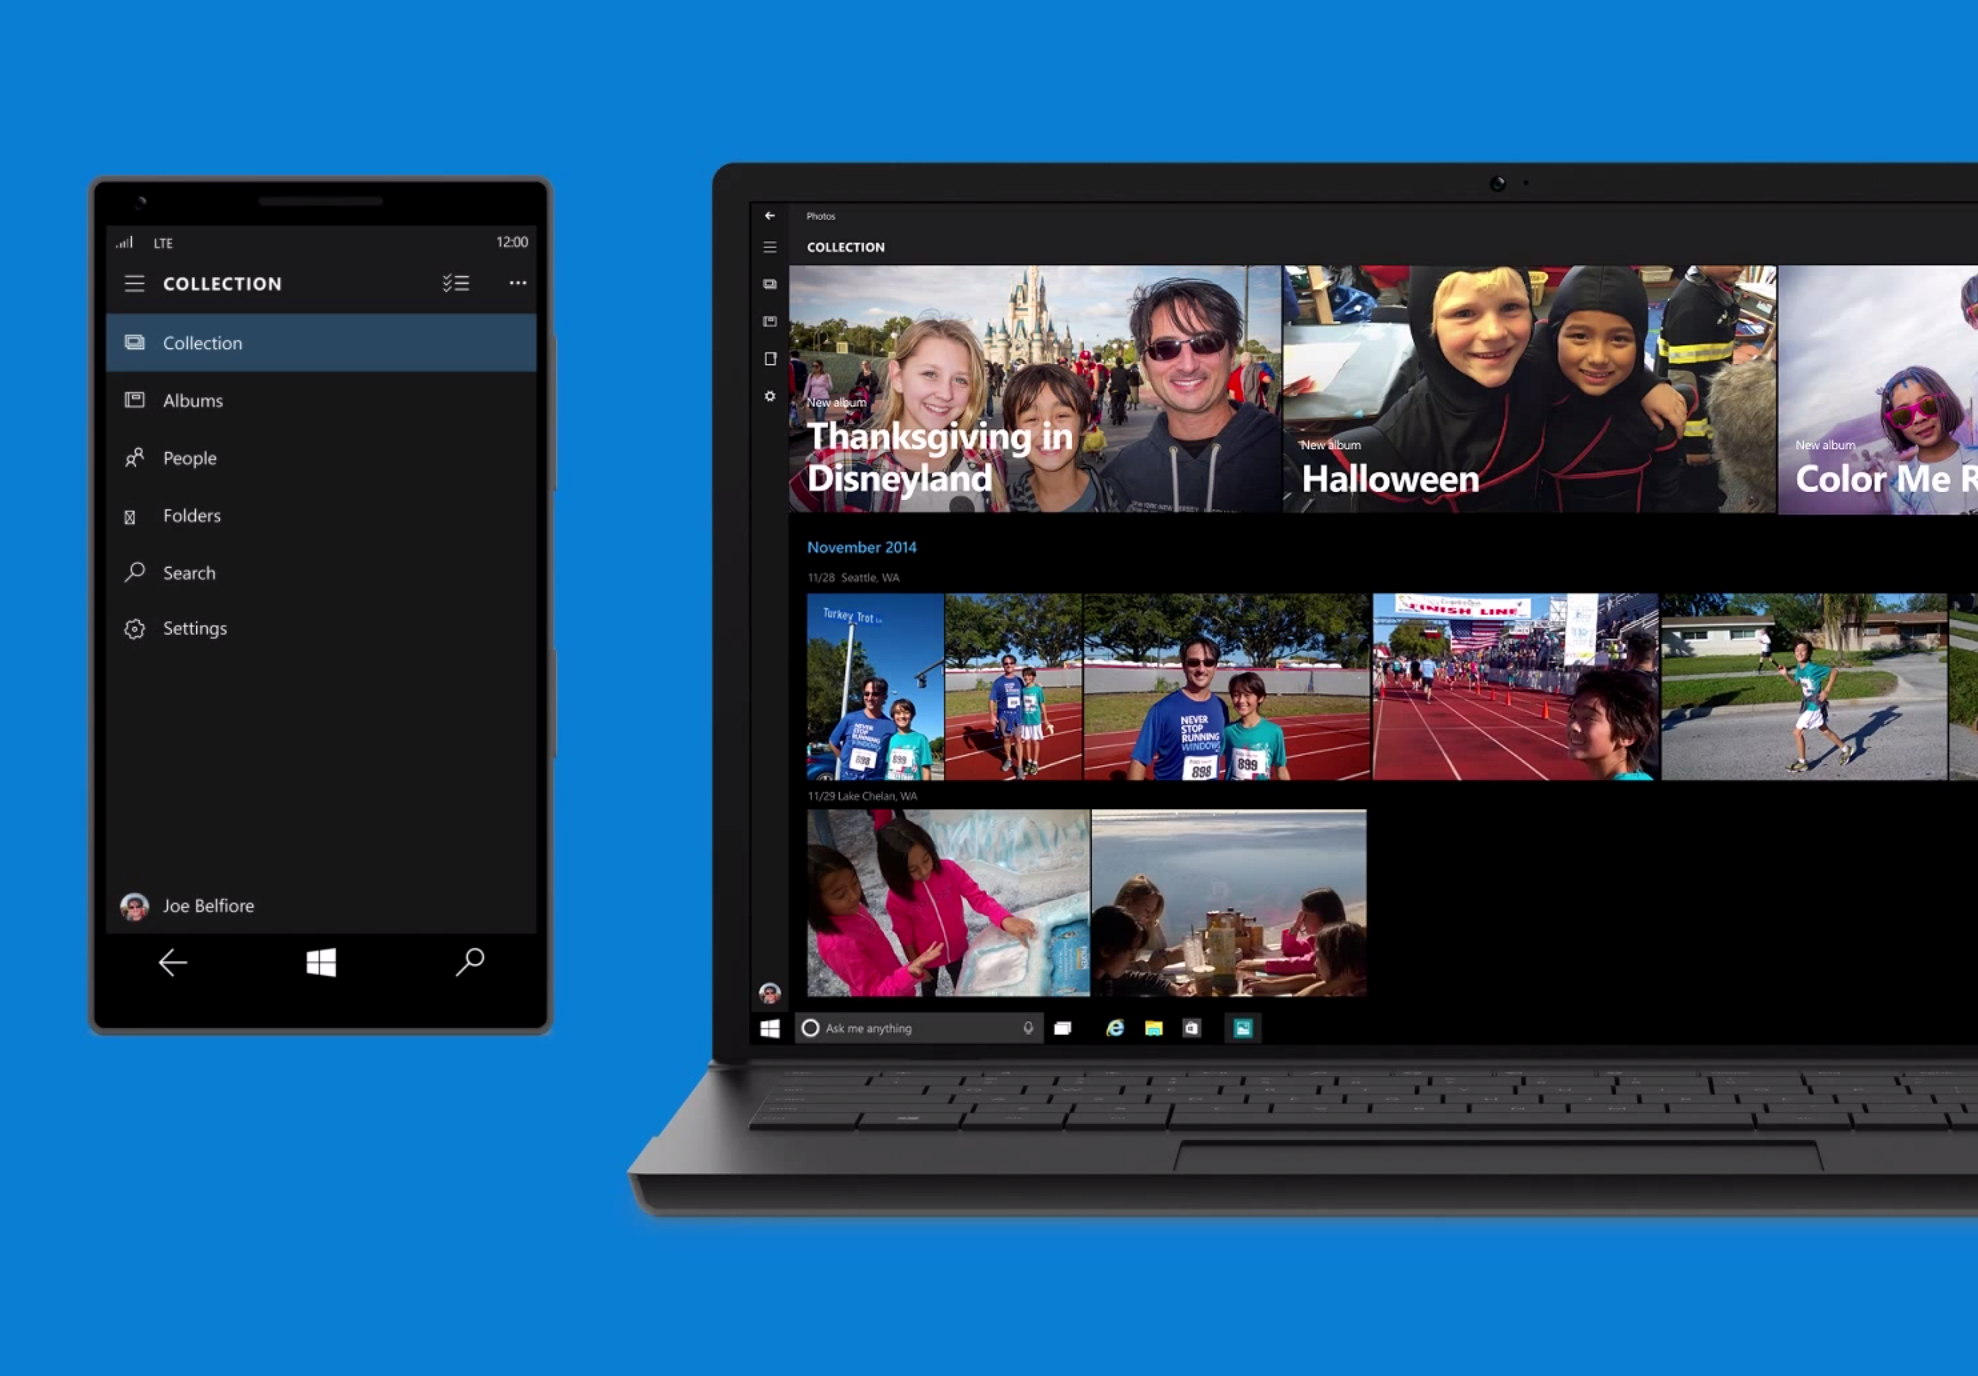 microsoft windows 10 new features cortana universal apps spartan browser and more image 6